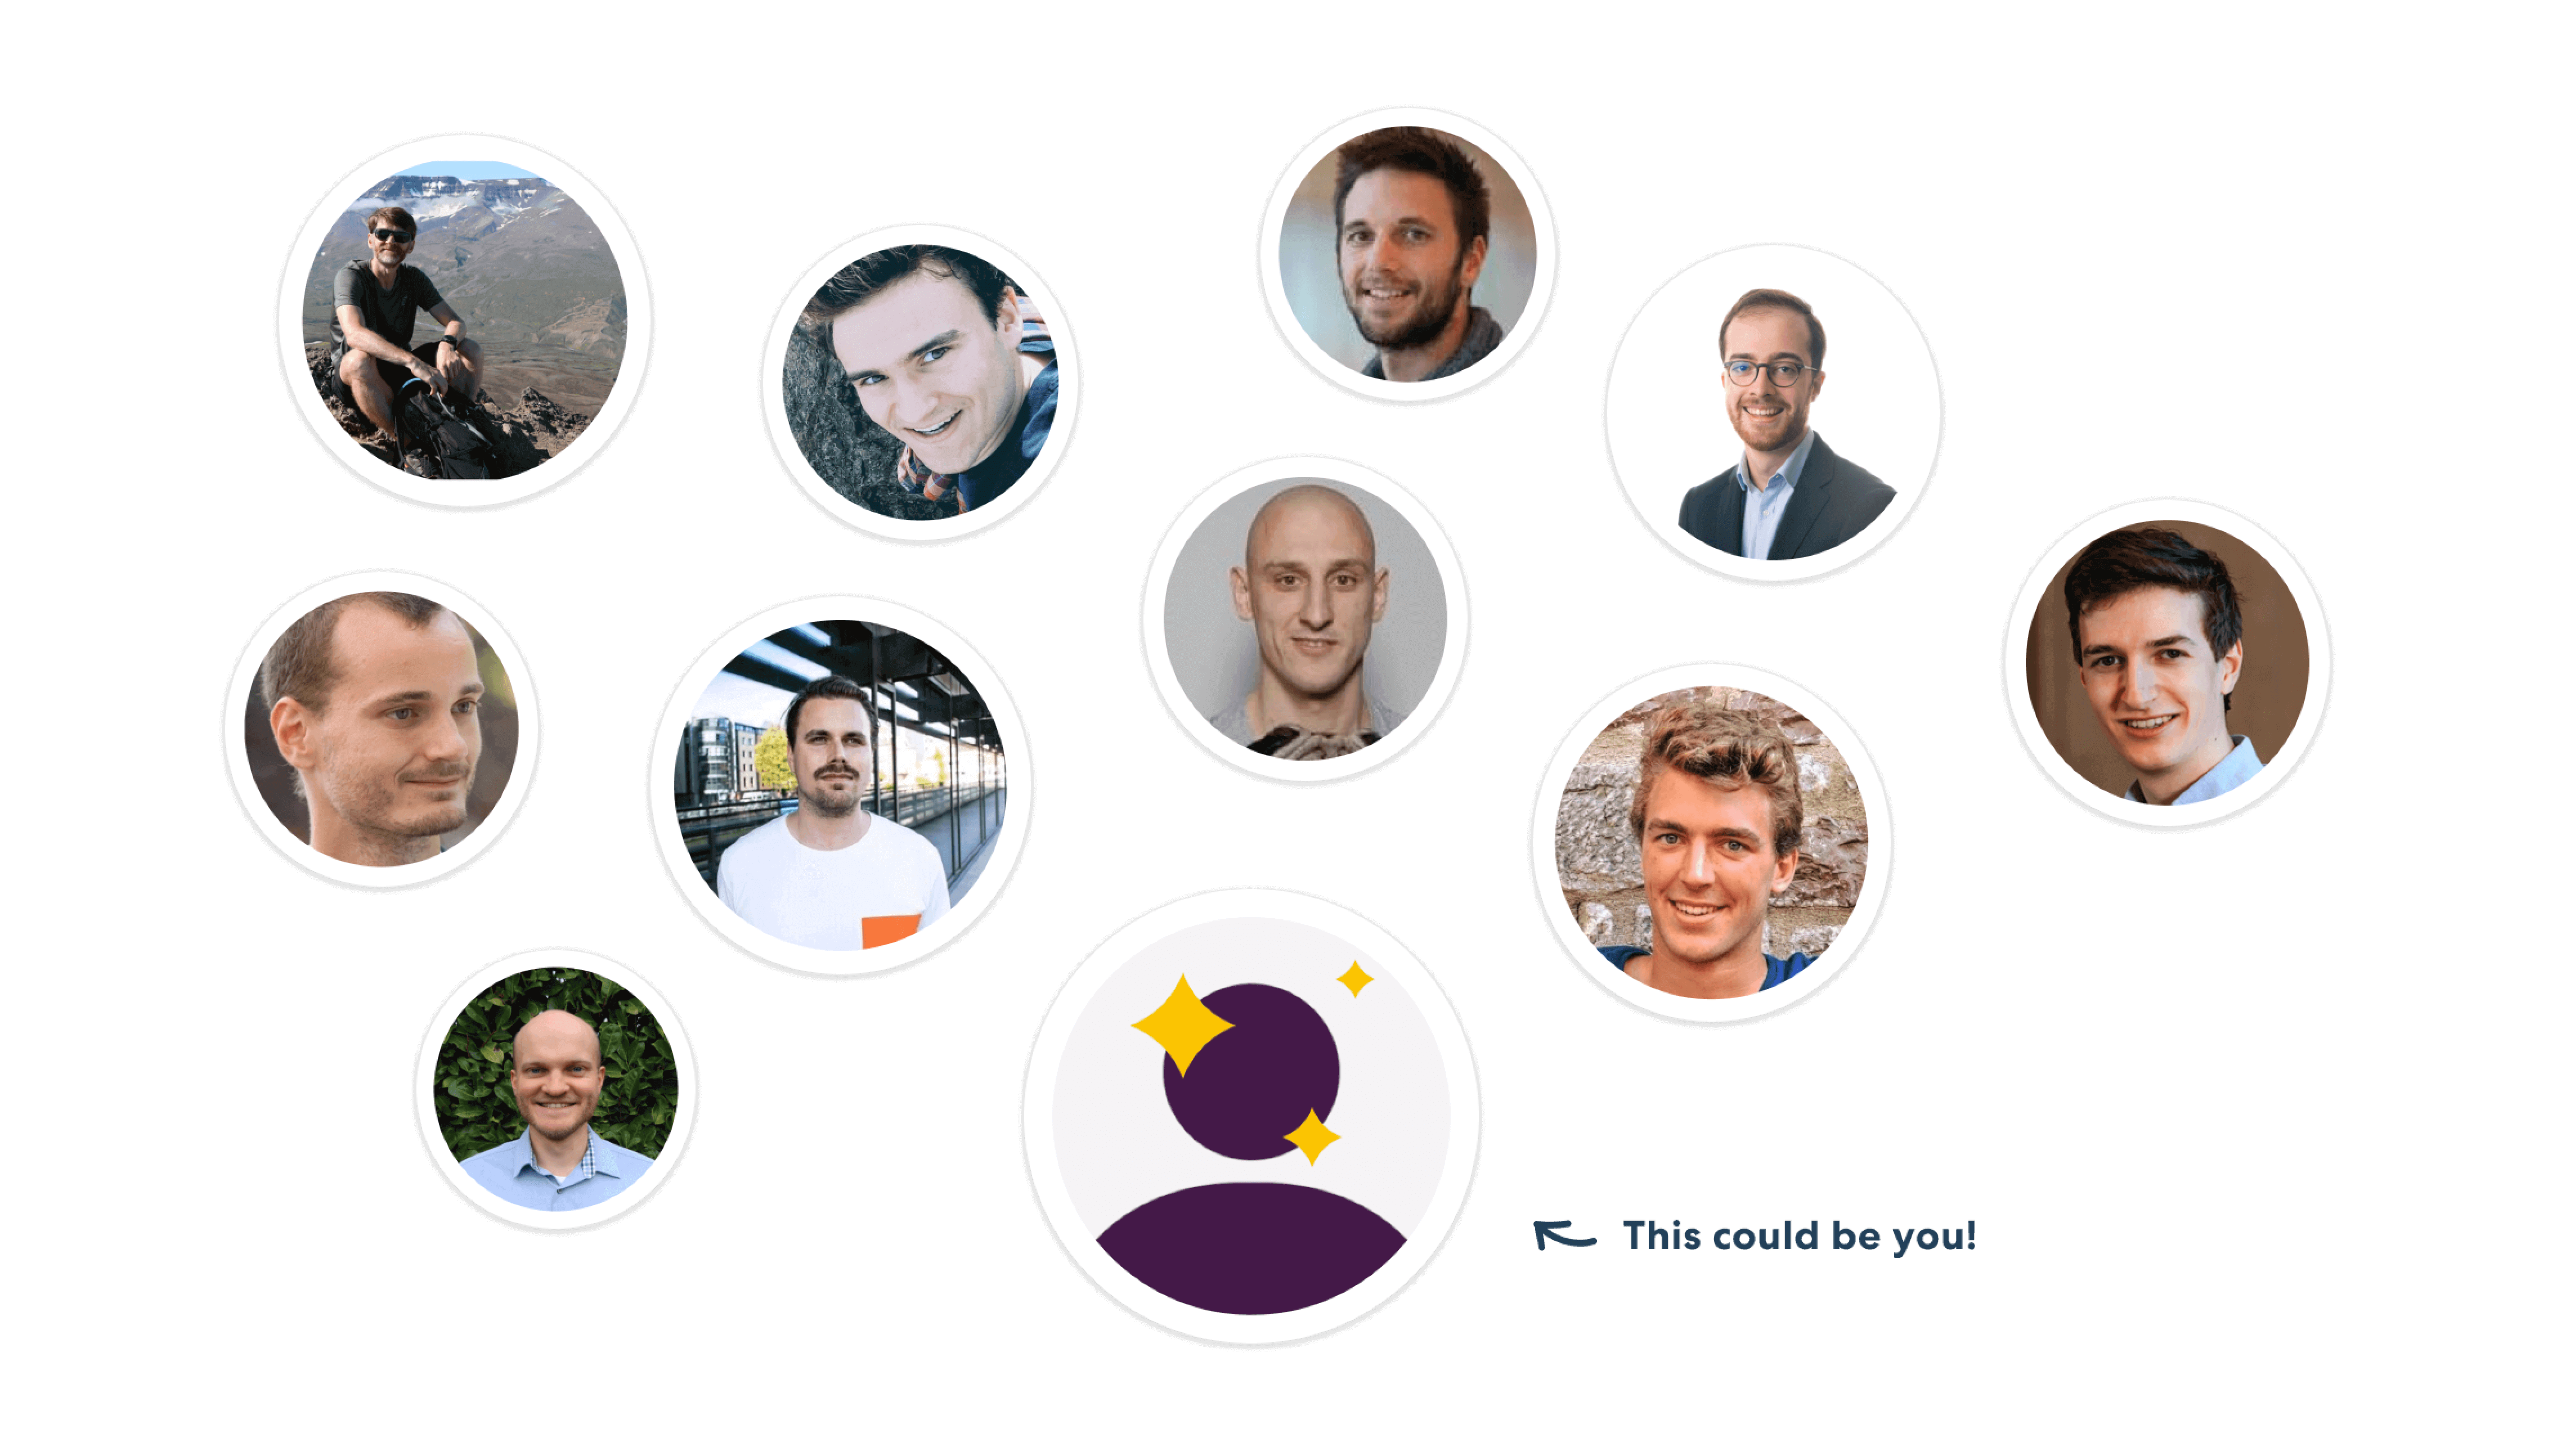 Overview of team members